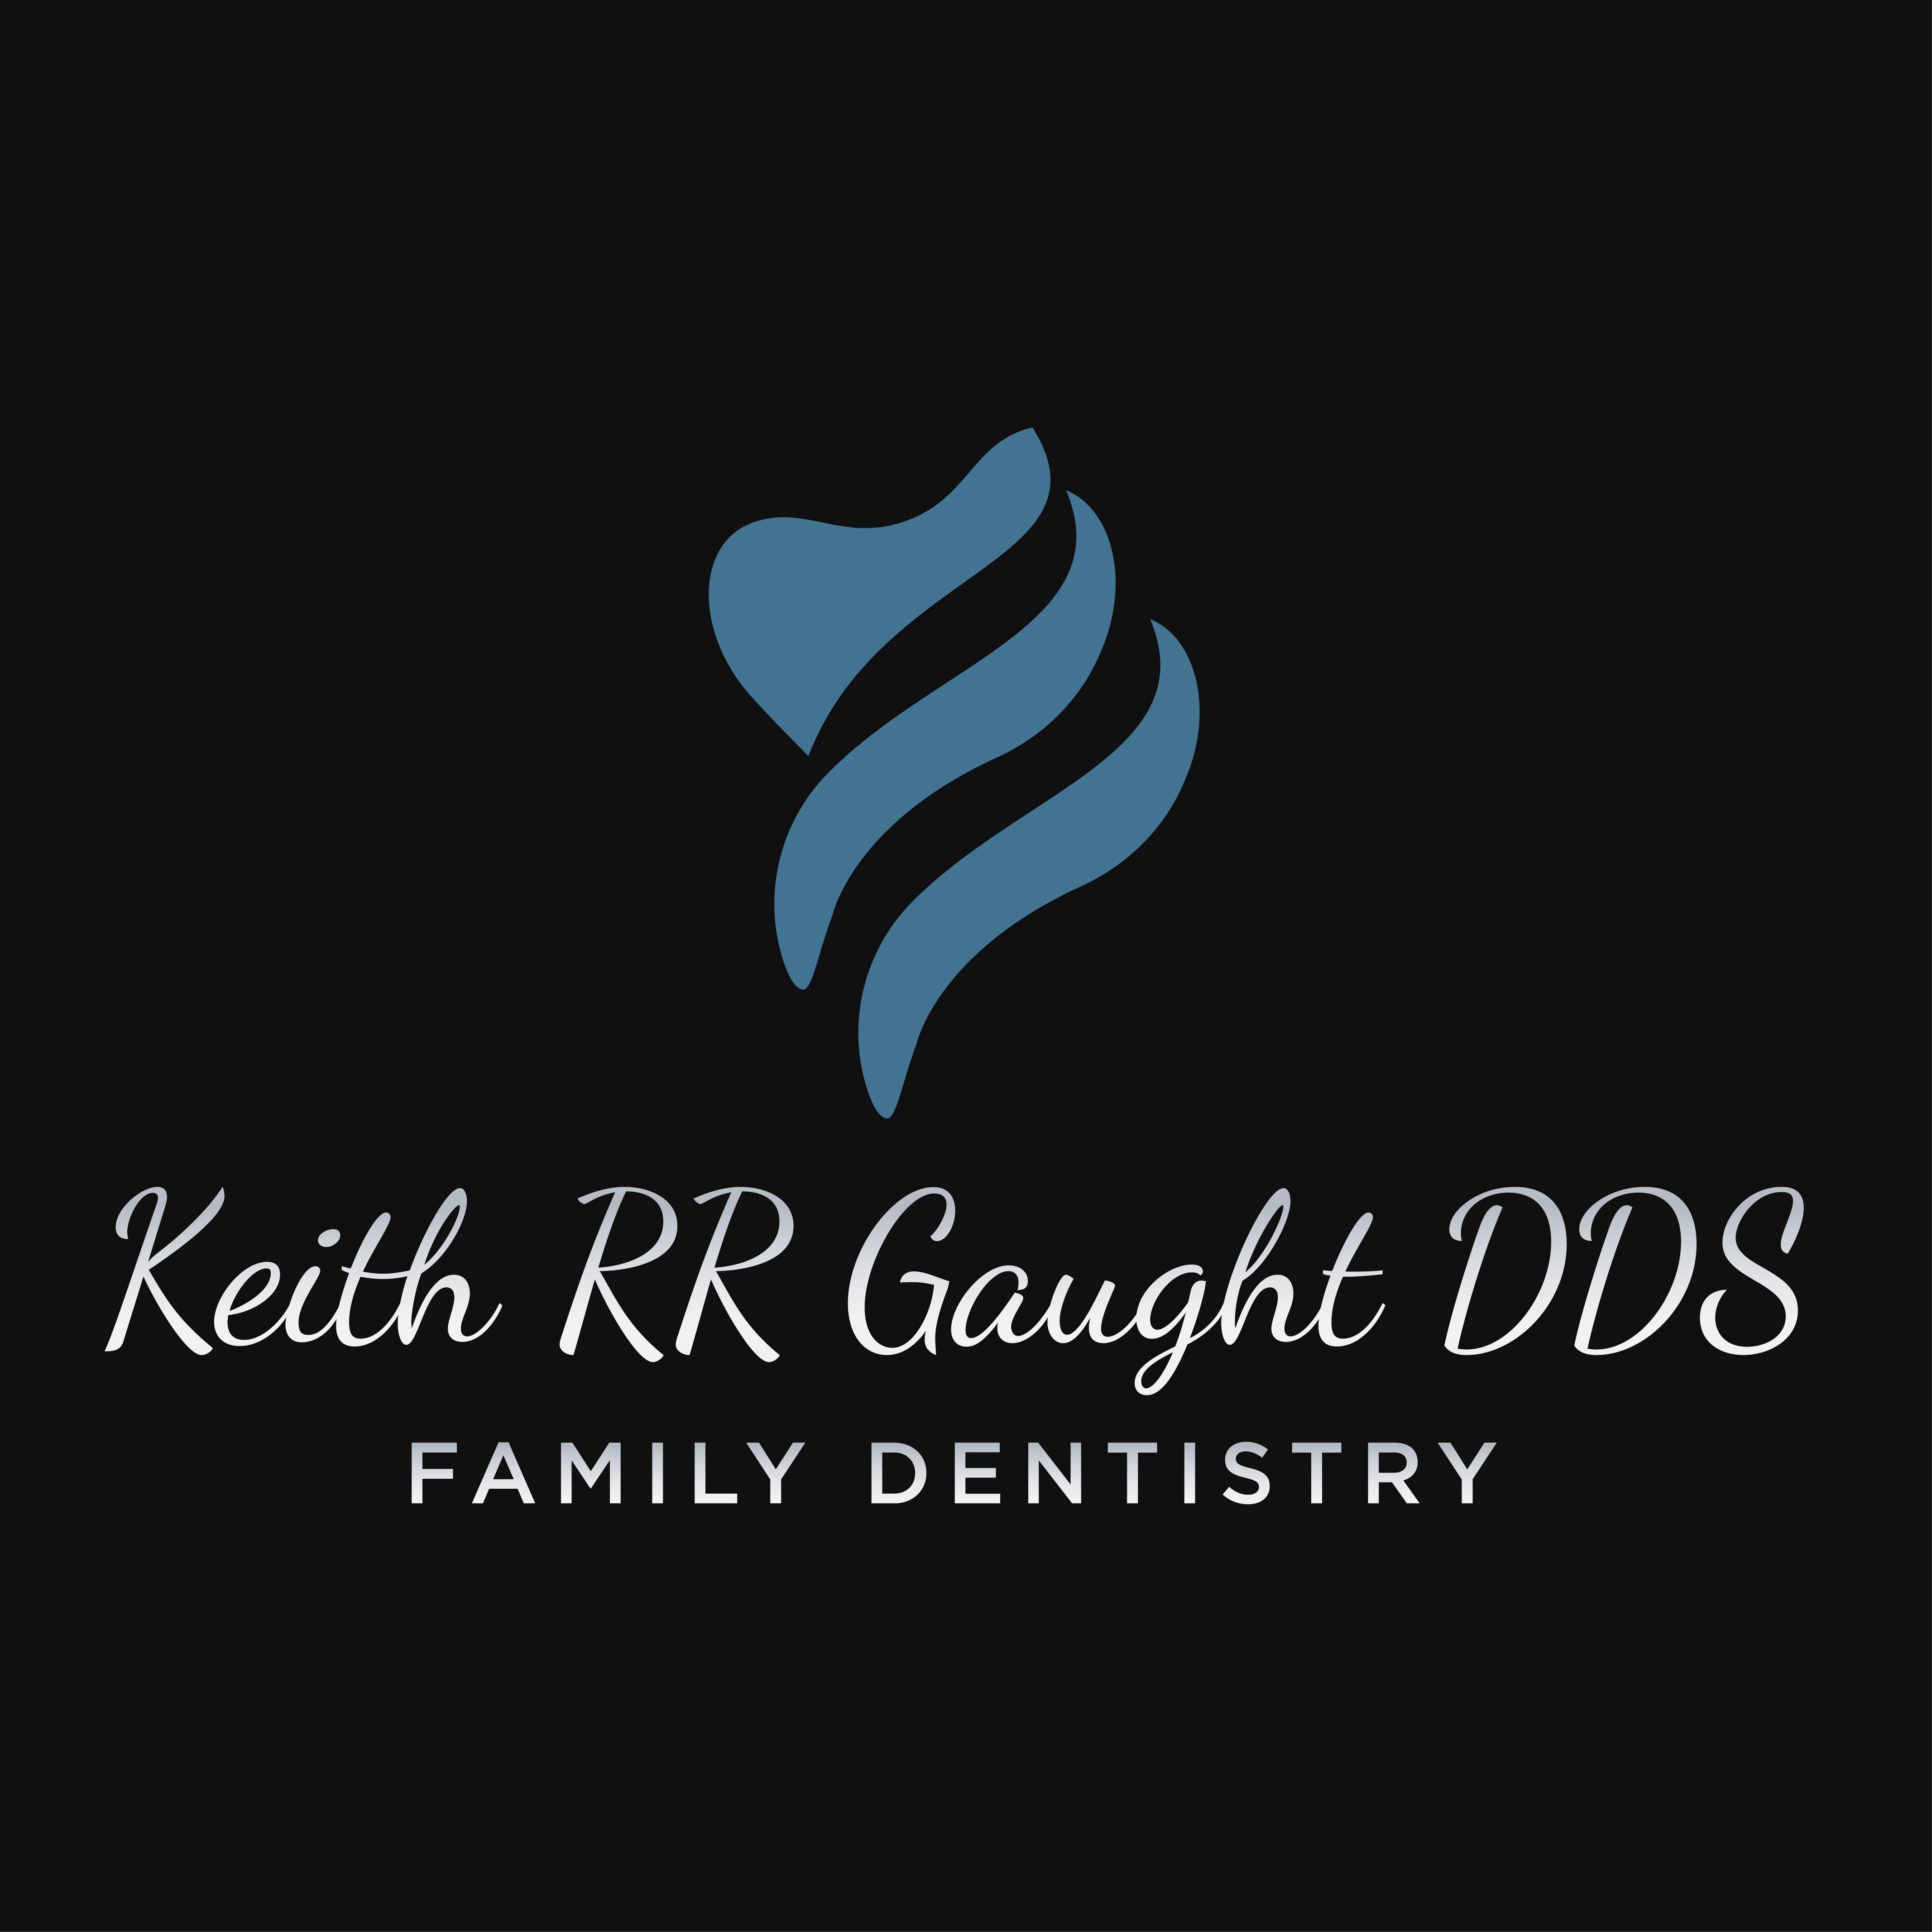 Keith RR Gaught DDS Family Dentistry Logo